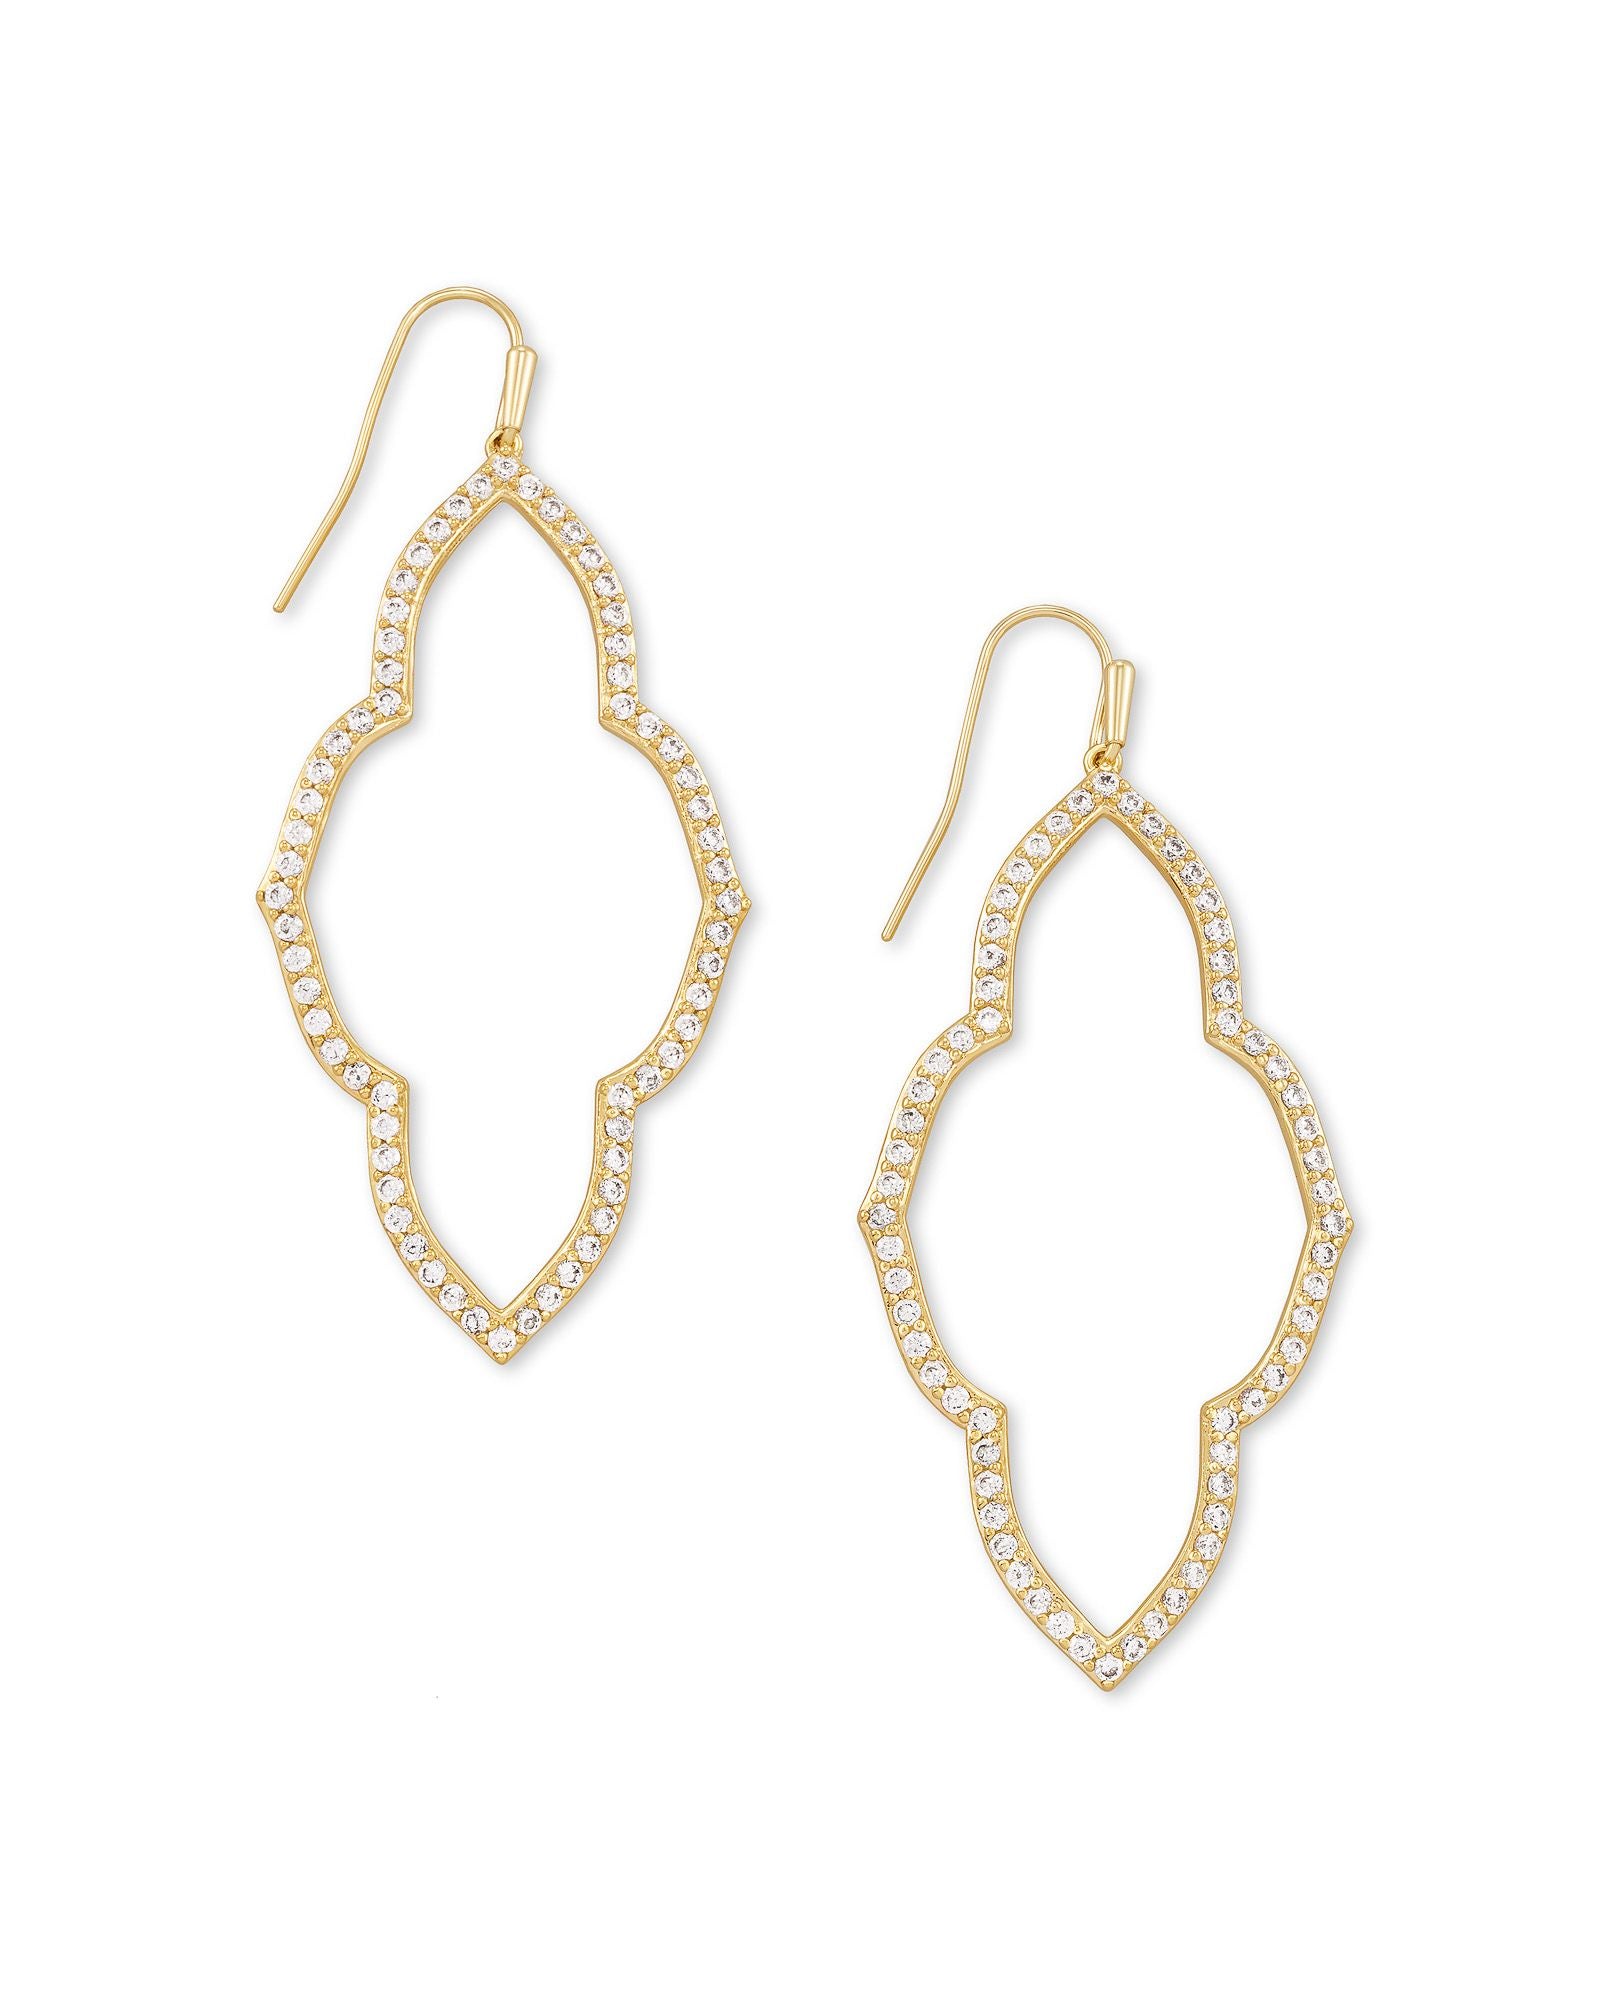 Abbie Open Frame Earring - Gold or Silver